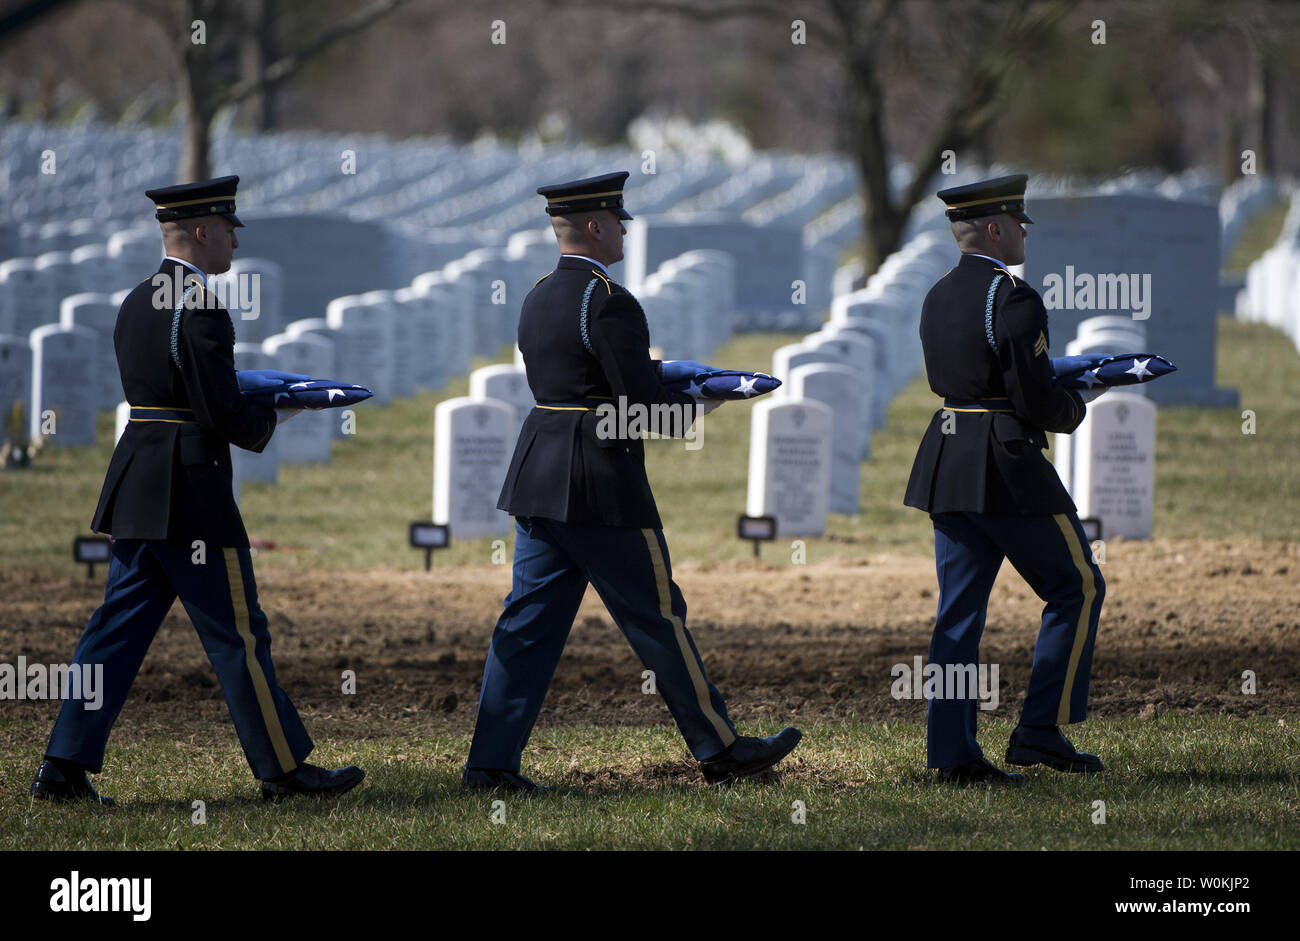 Members of an Army Honor Guard with the Army's 3rd Infantry Regiment (The Old Guard) carry flags during a funeral service for U.S. Army Sgt. First Class Matthew Q. McClintock, at Arlington National Cemetery in Arlington, Virginia on March 7, 2015. SFC McClintock, a U.S. Army Special Forces soldier, was killed in action on Tuesday, January 5, 2016, in Afghanistan. Photo by Kevin Dietsch/UPI Stock Photo